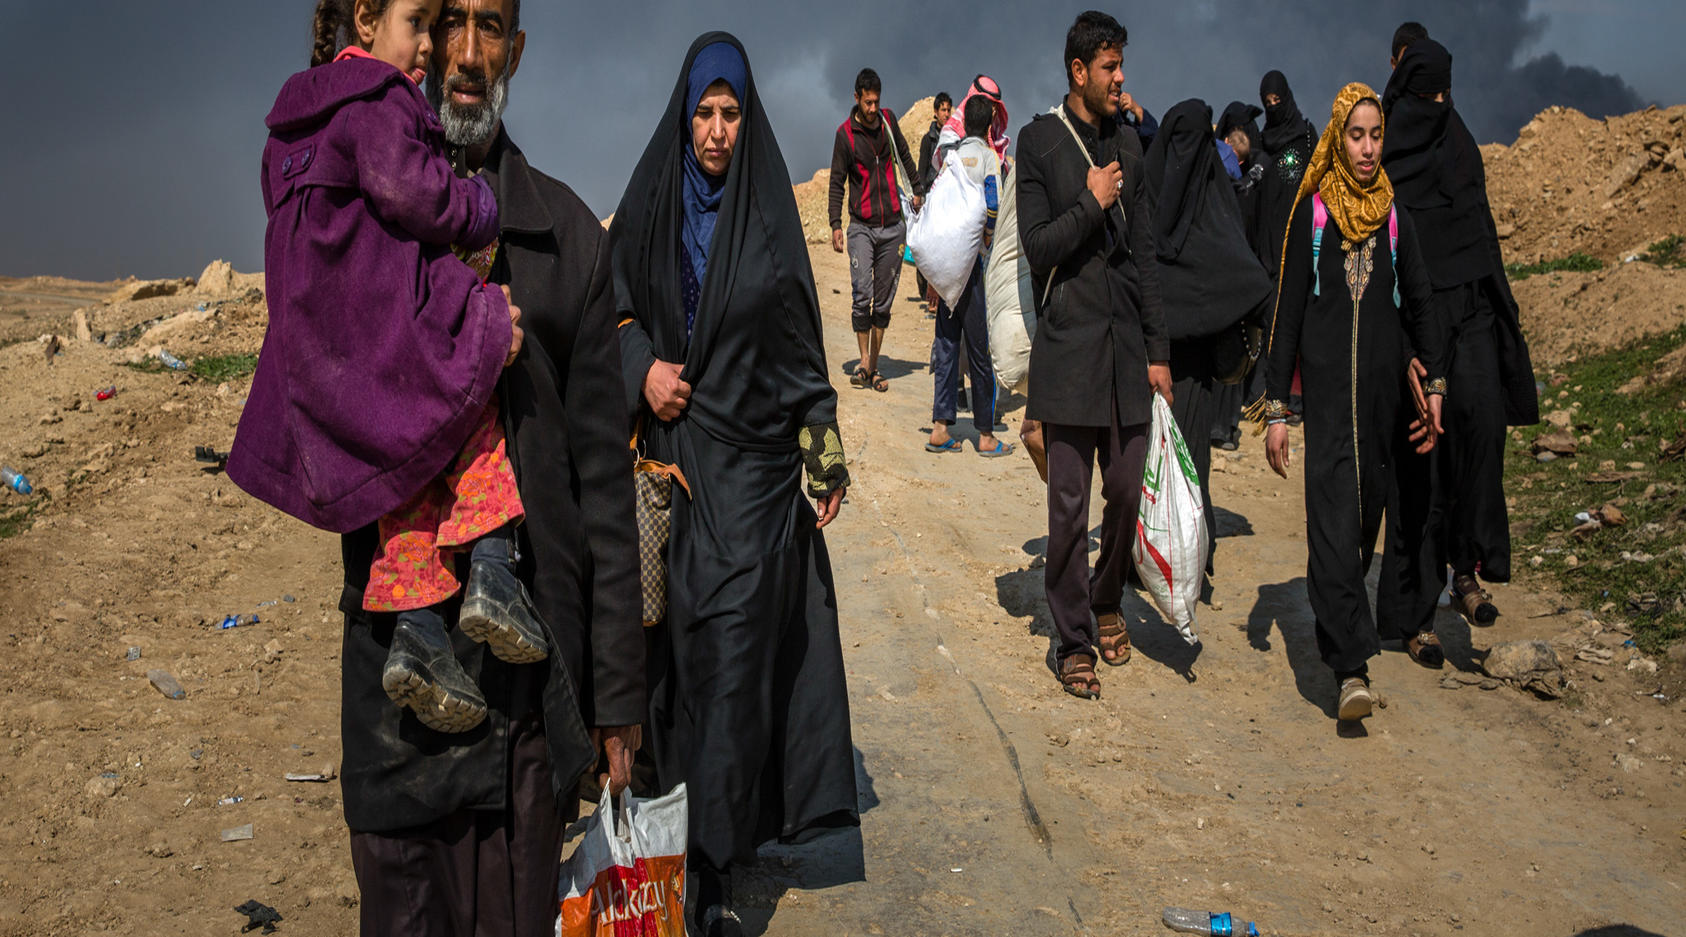 Civilians flee clashes between Iraqi forces and Islamic State fighters in western Mosul, Iraq, March 7, 2017. Car bombs snipers, mortar fire and coalition airstrikes have all taken a heavy toll on civilians during the offensive to oust the Islamic State group from Mosul. 